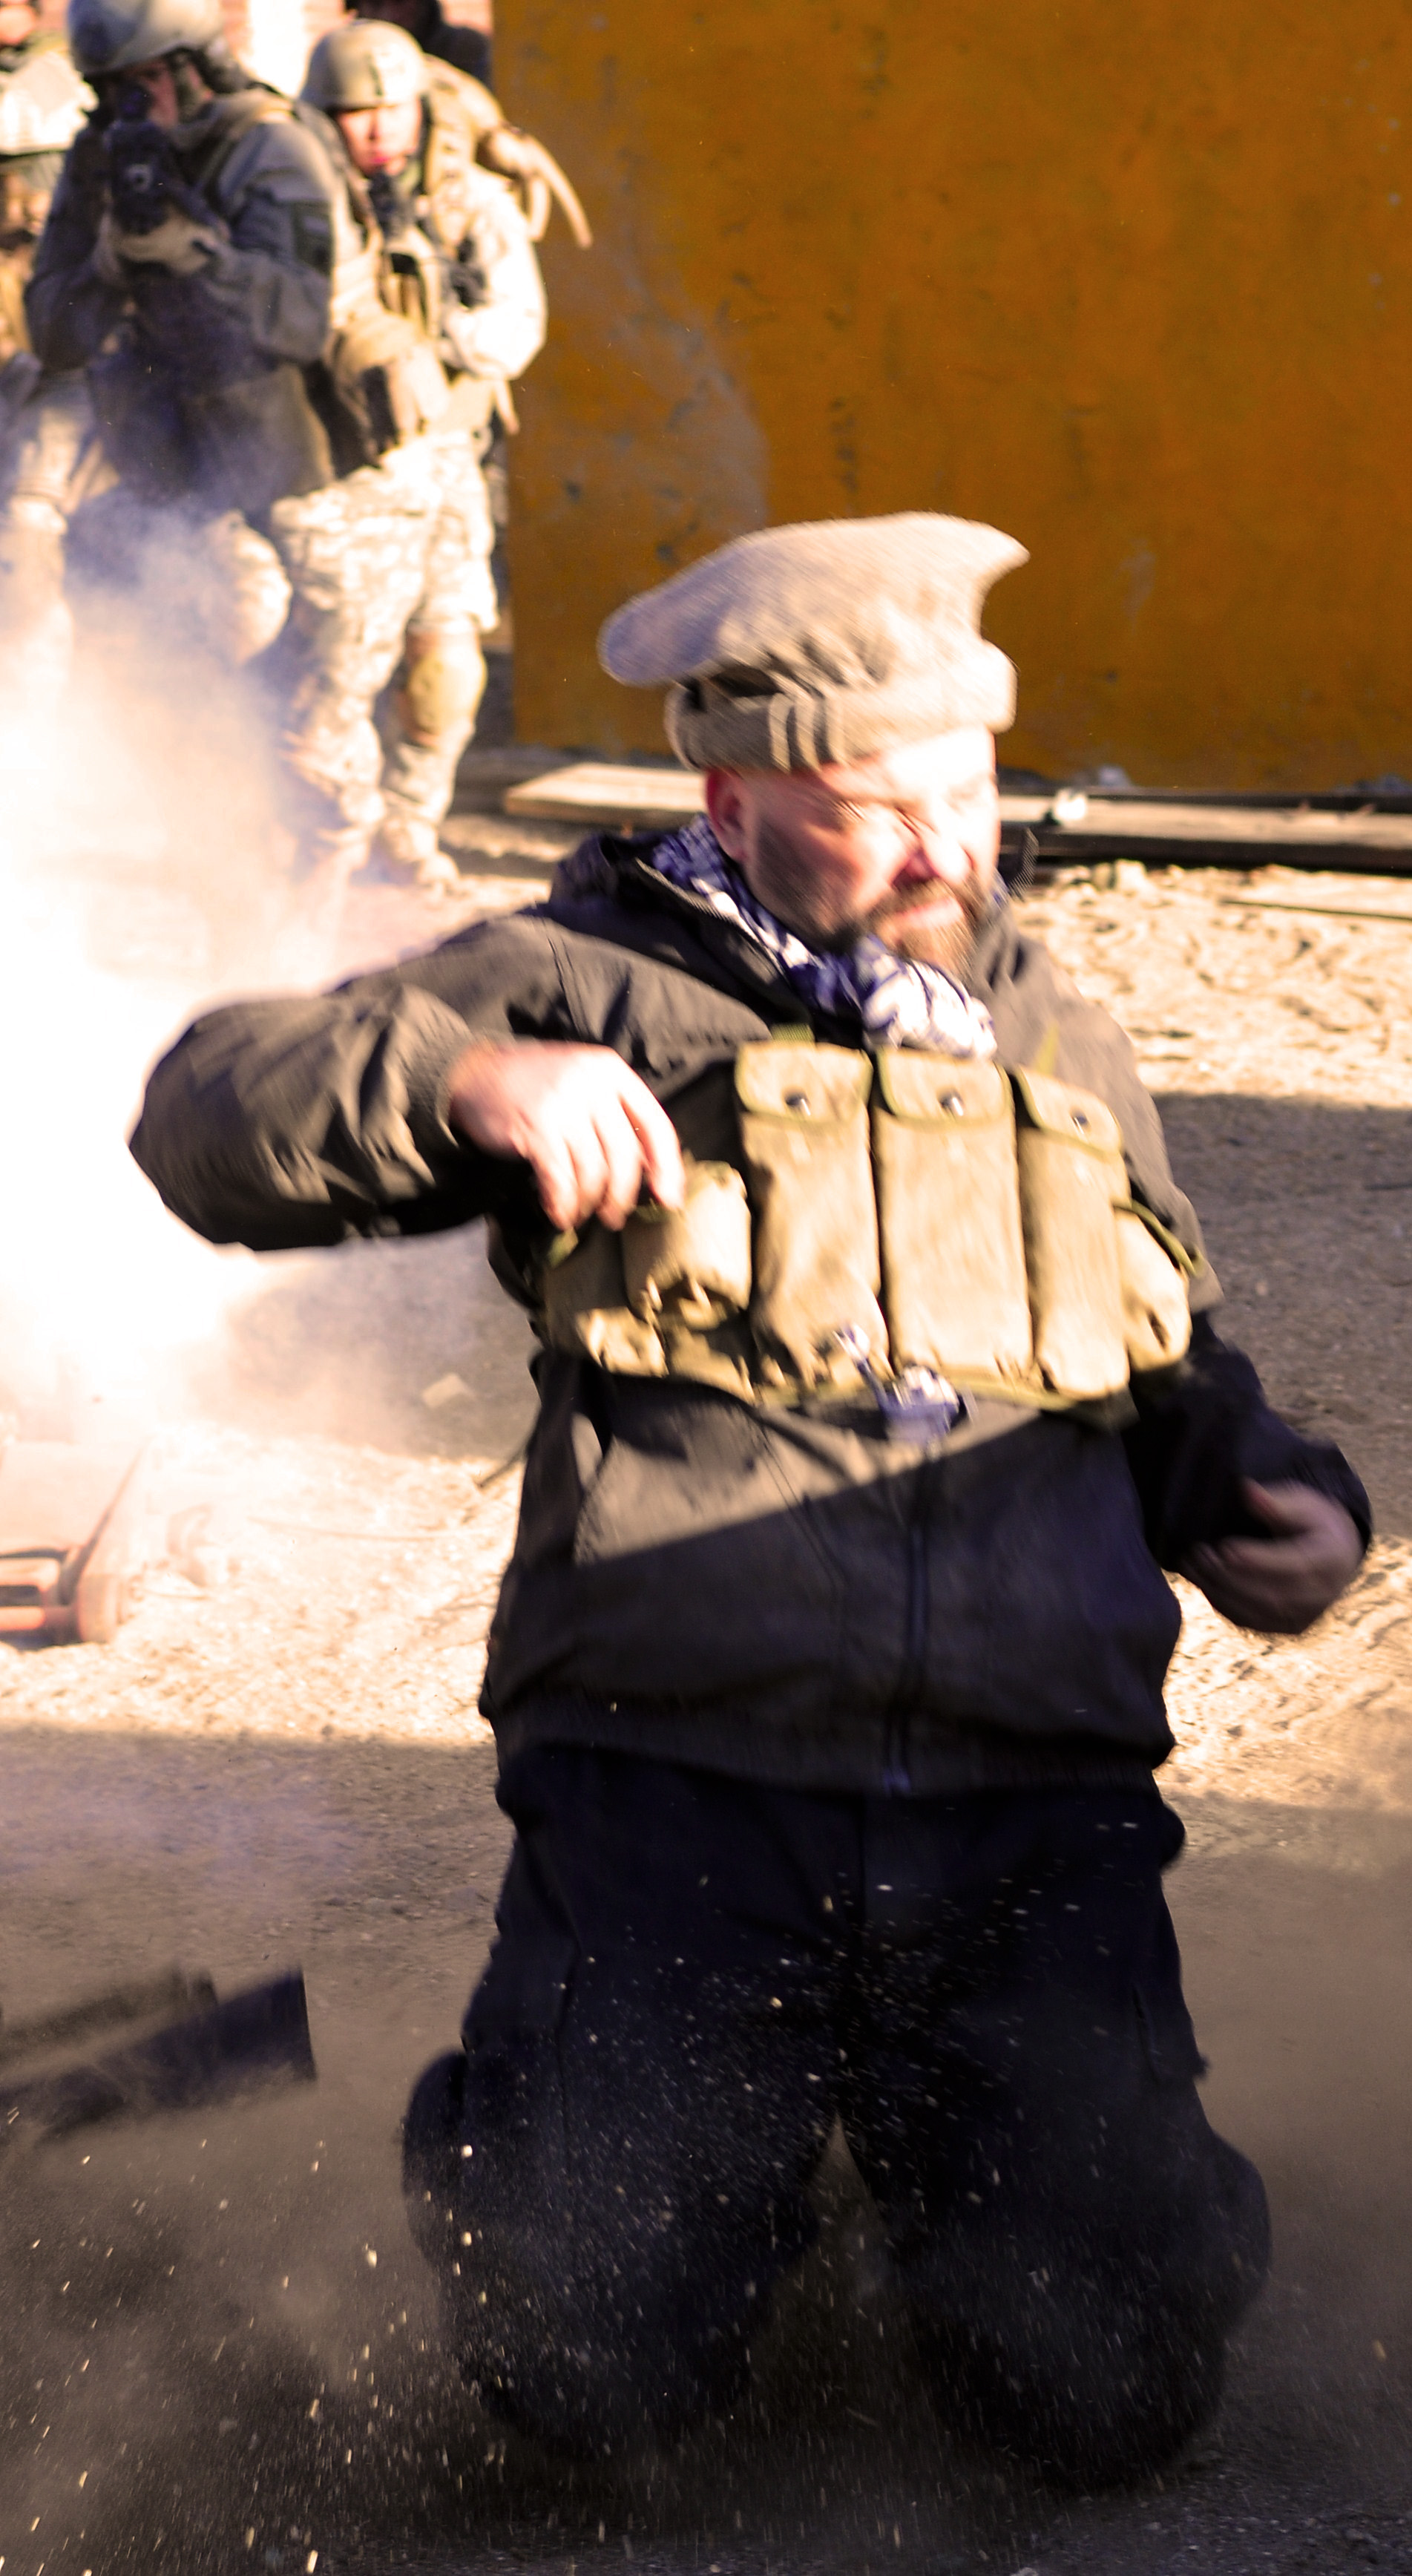 Hugh Daly (as Foreign fighter),being gunned down by American Special Operations soldiers in a soon to be released 'untitled' project.